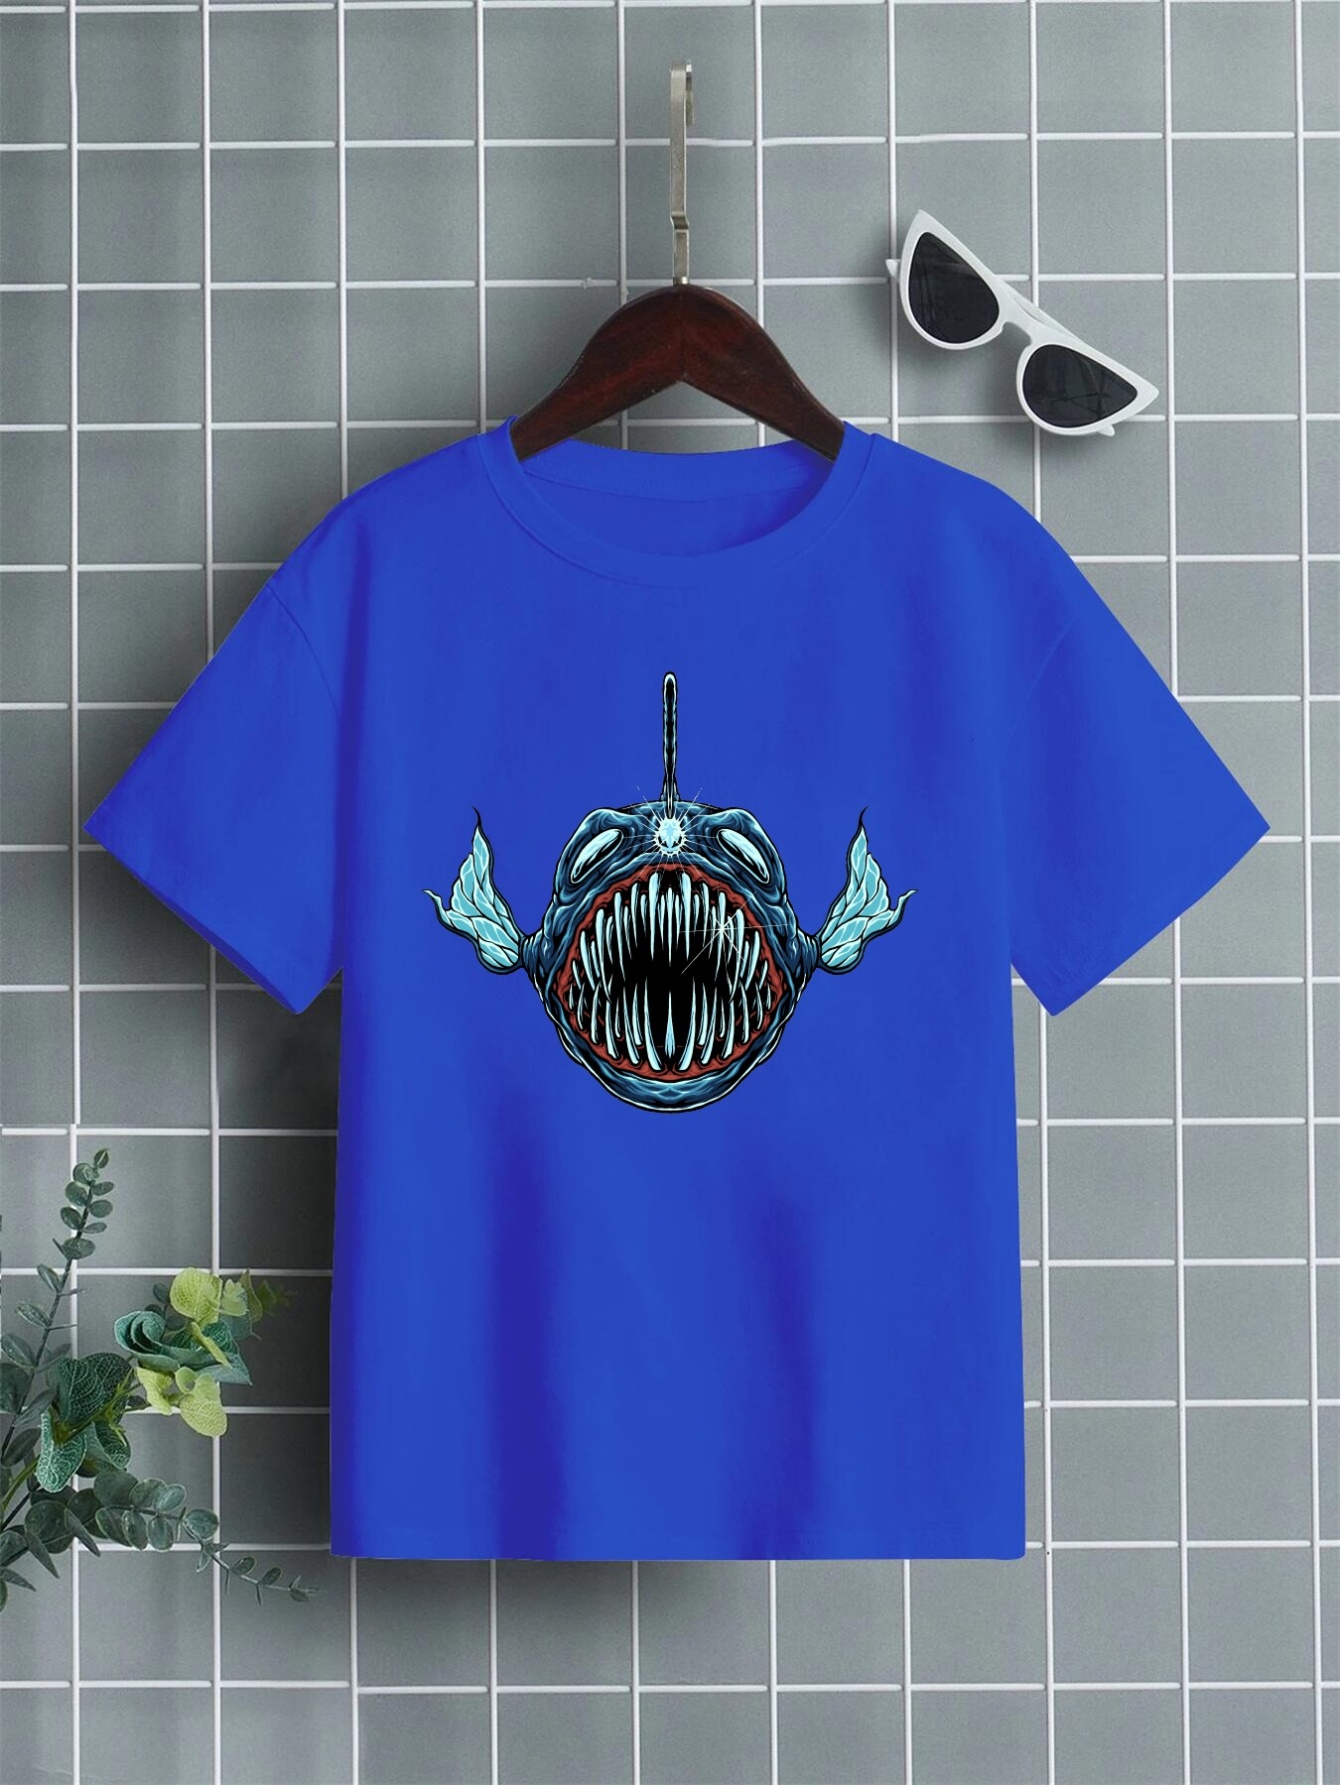 Ugly Fish Print T Shirt, Tees For Kids Boys, Casual Short Sleeve T-shirt  For Summer Spring Fall, Tops As Gifts